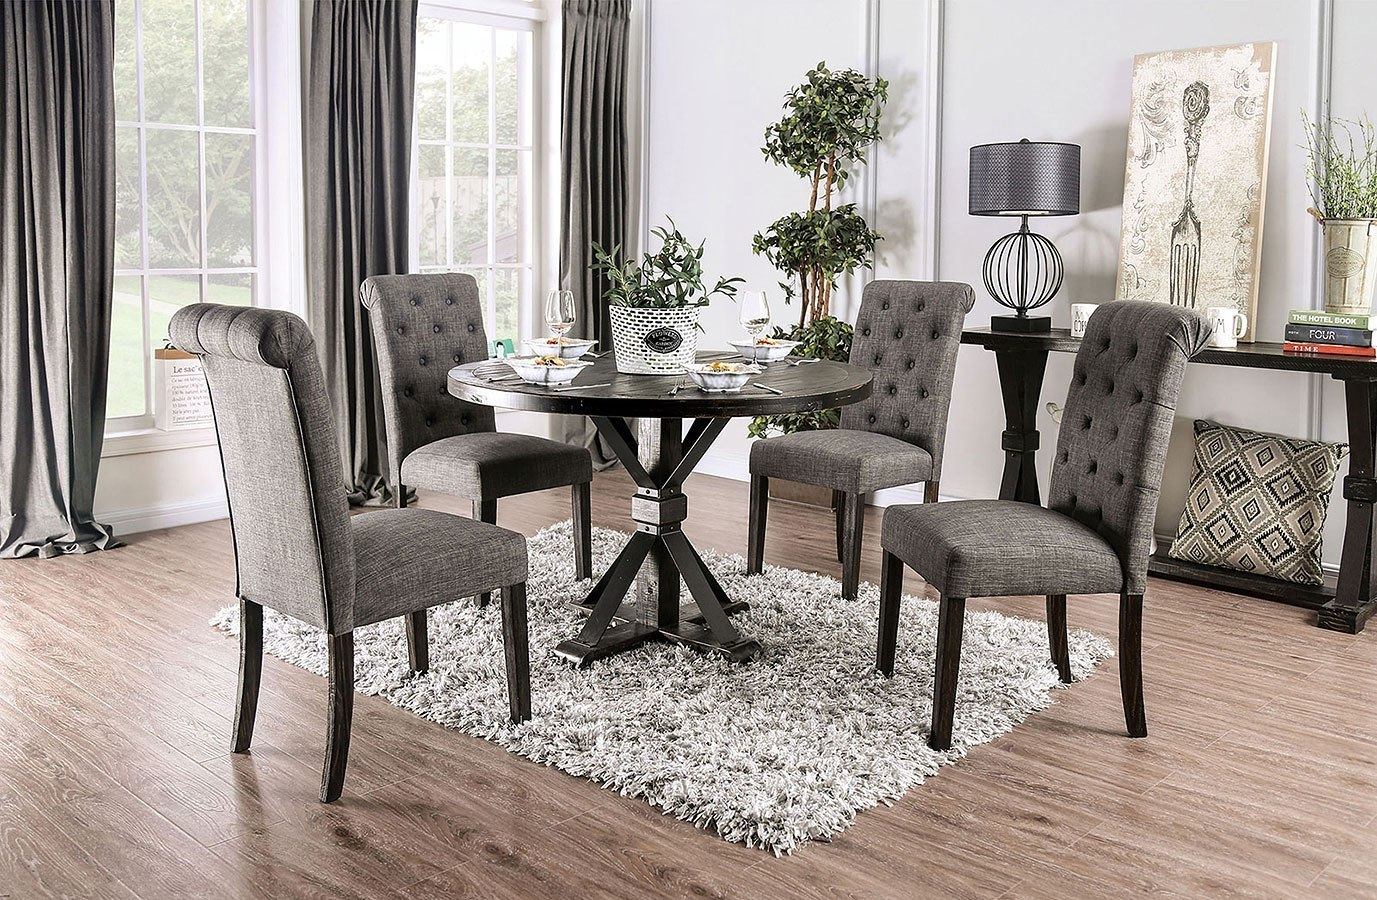 Alfred Round Dining Room Set W Gray Chairs throughout sizing 1377 X 900